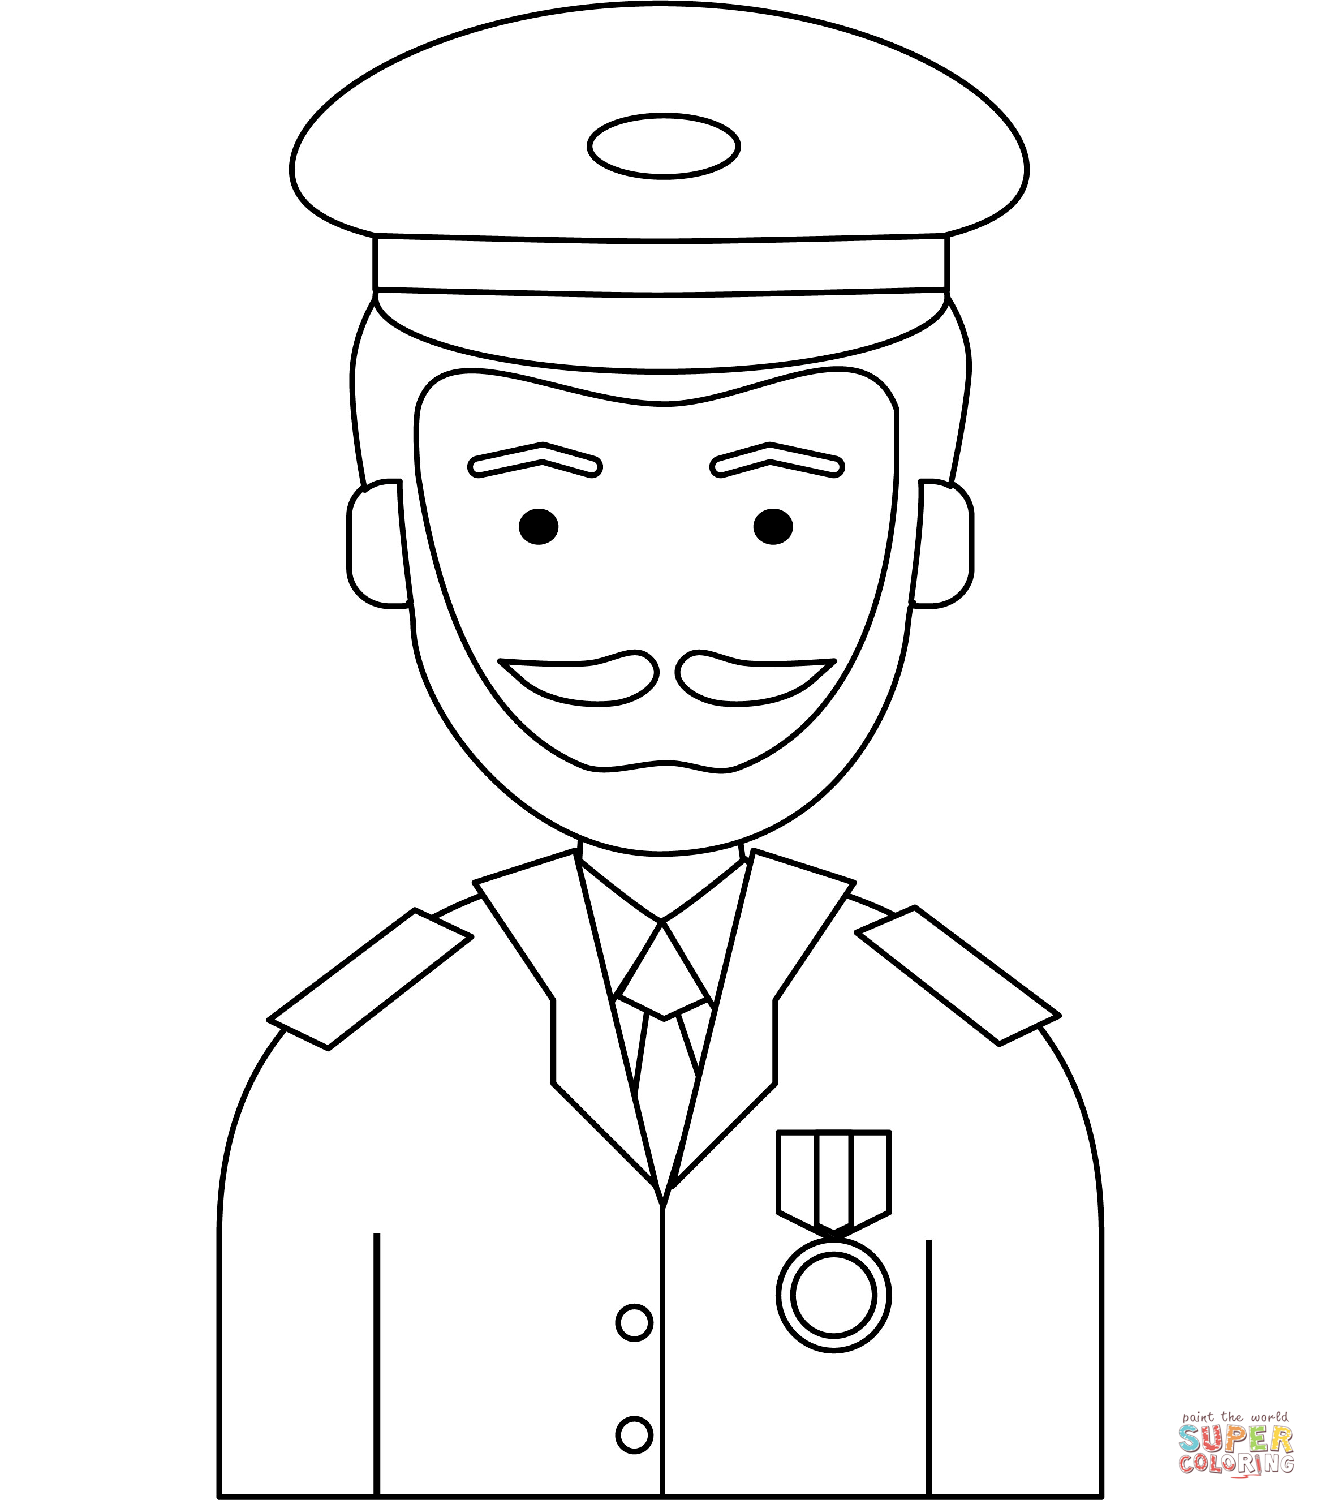 Veteran coloring page free printable coloring pages